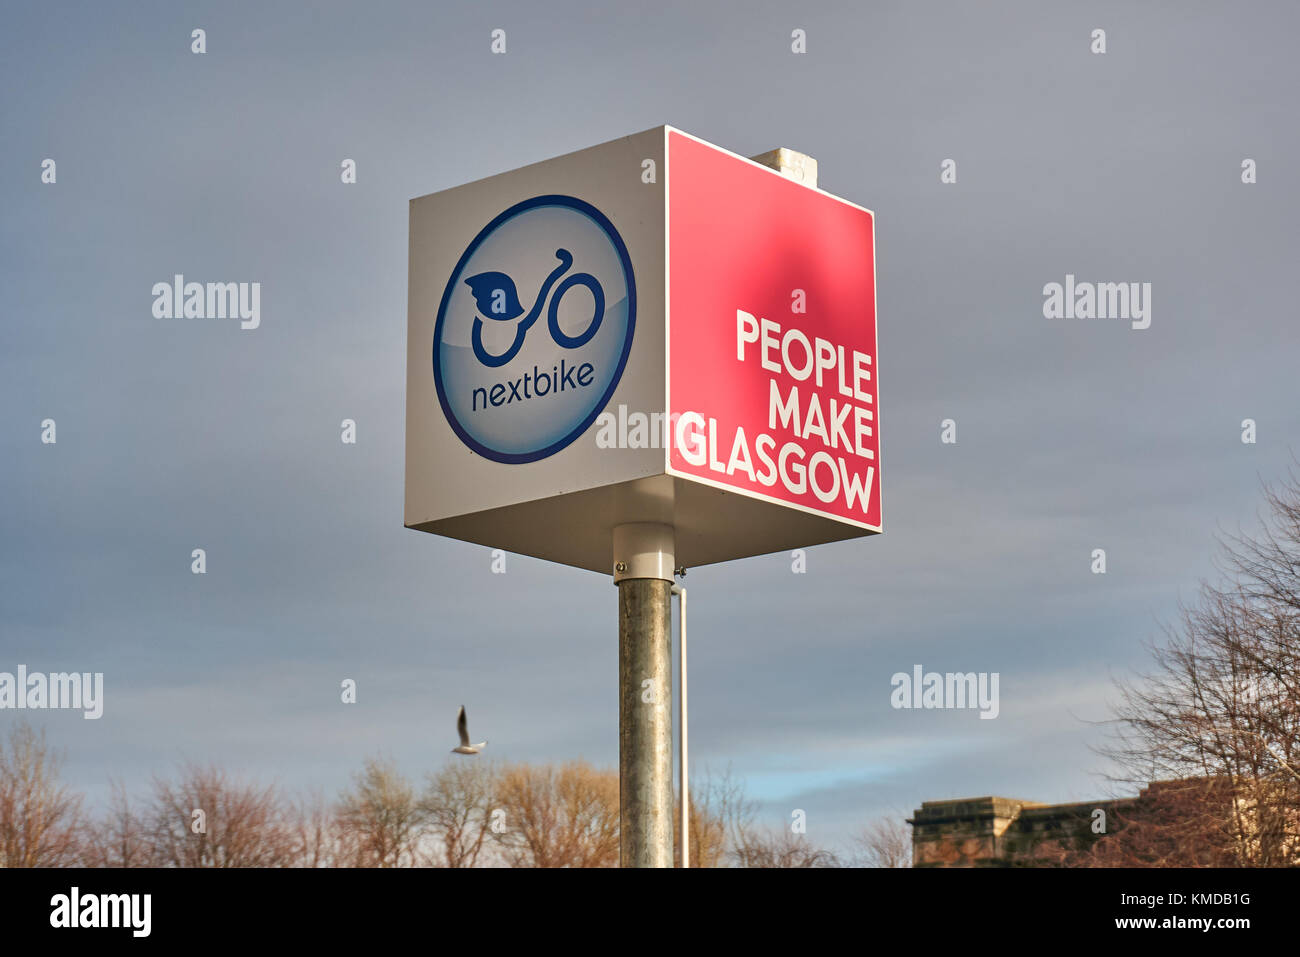 Glasgow, UK - 1 December 2017 : A city network of hire bikes, Nextbike is increasingly popular amongst the citizens of Glasgow, providing a cheap and  Stock Photo